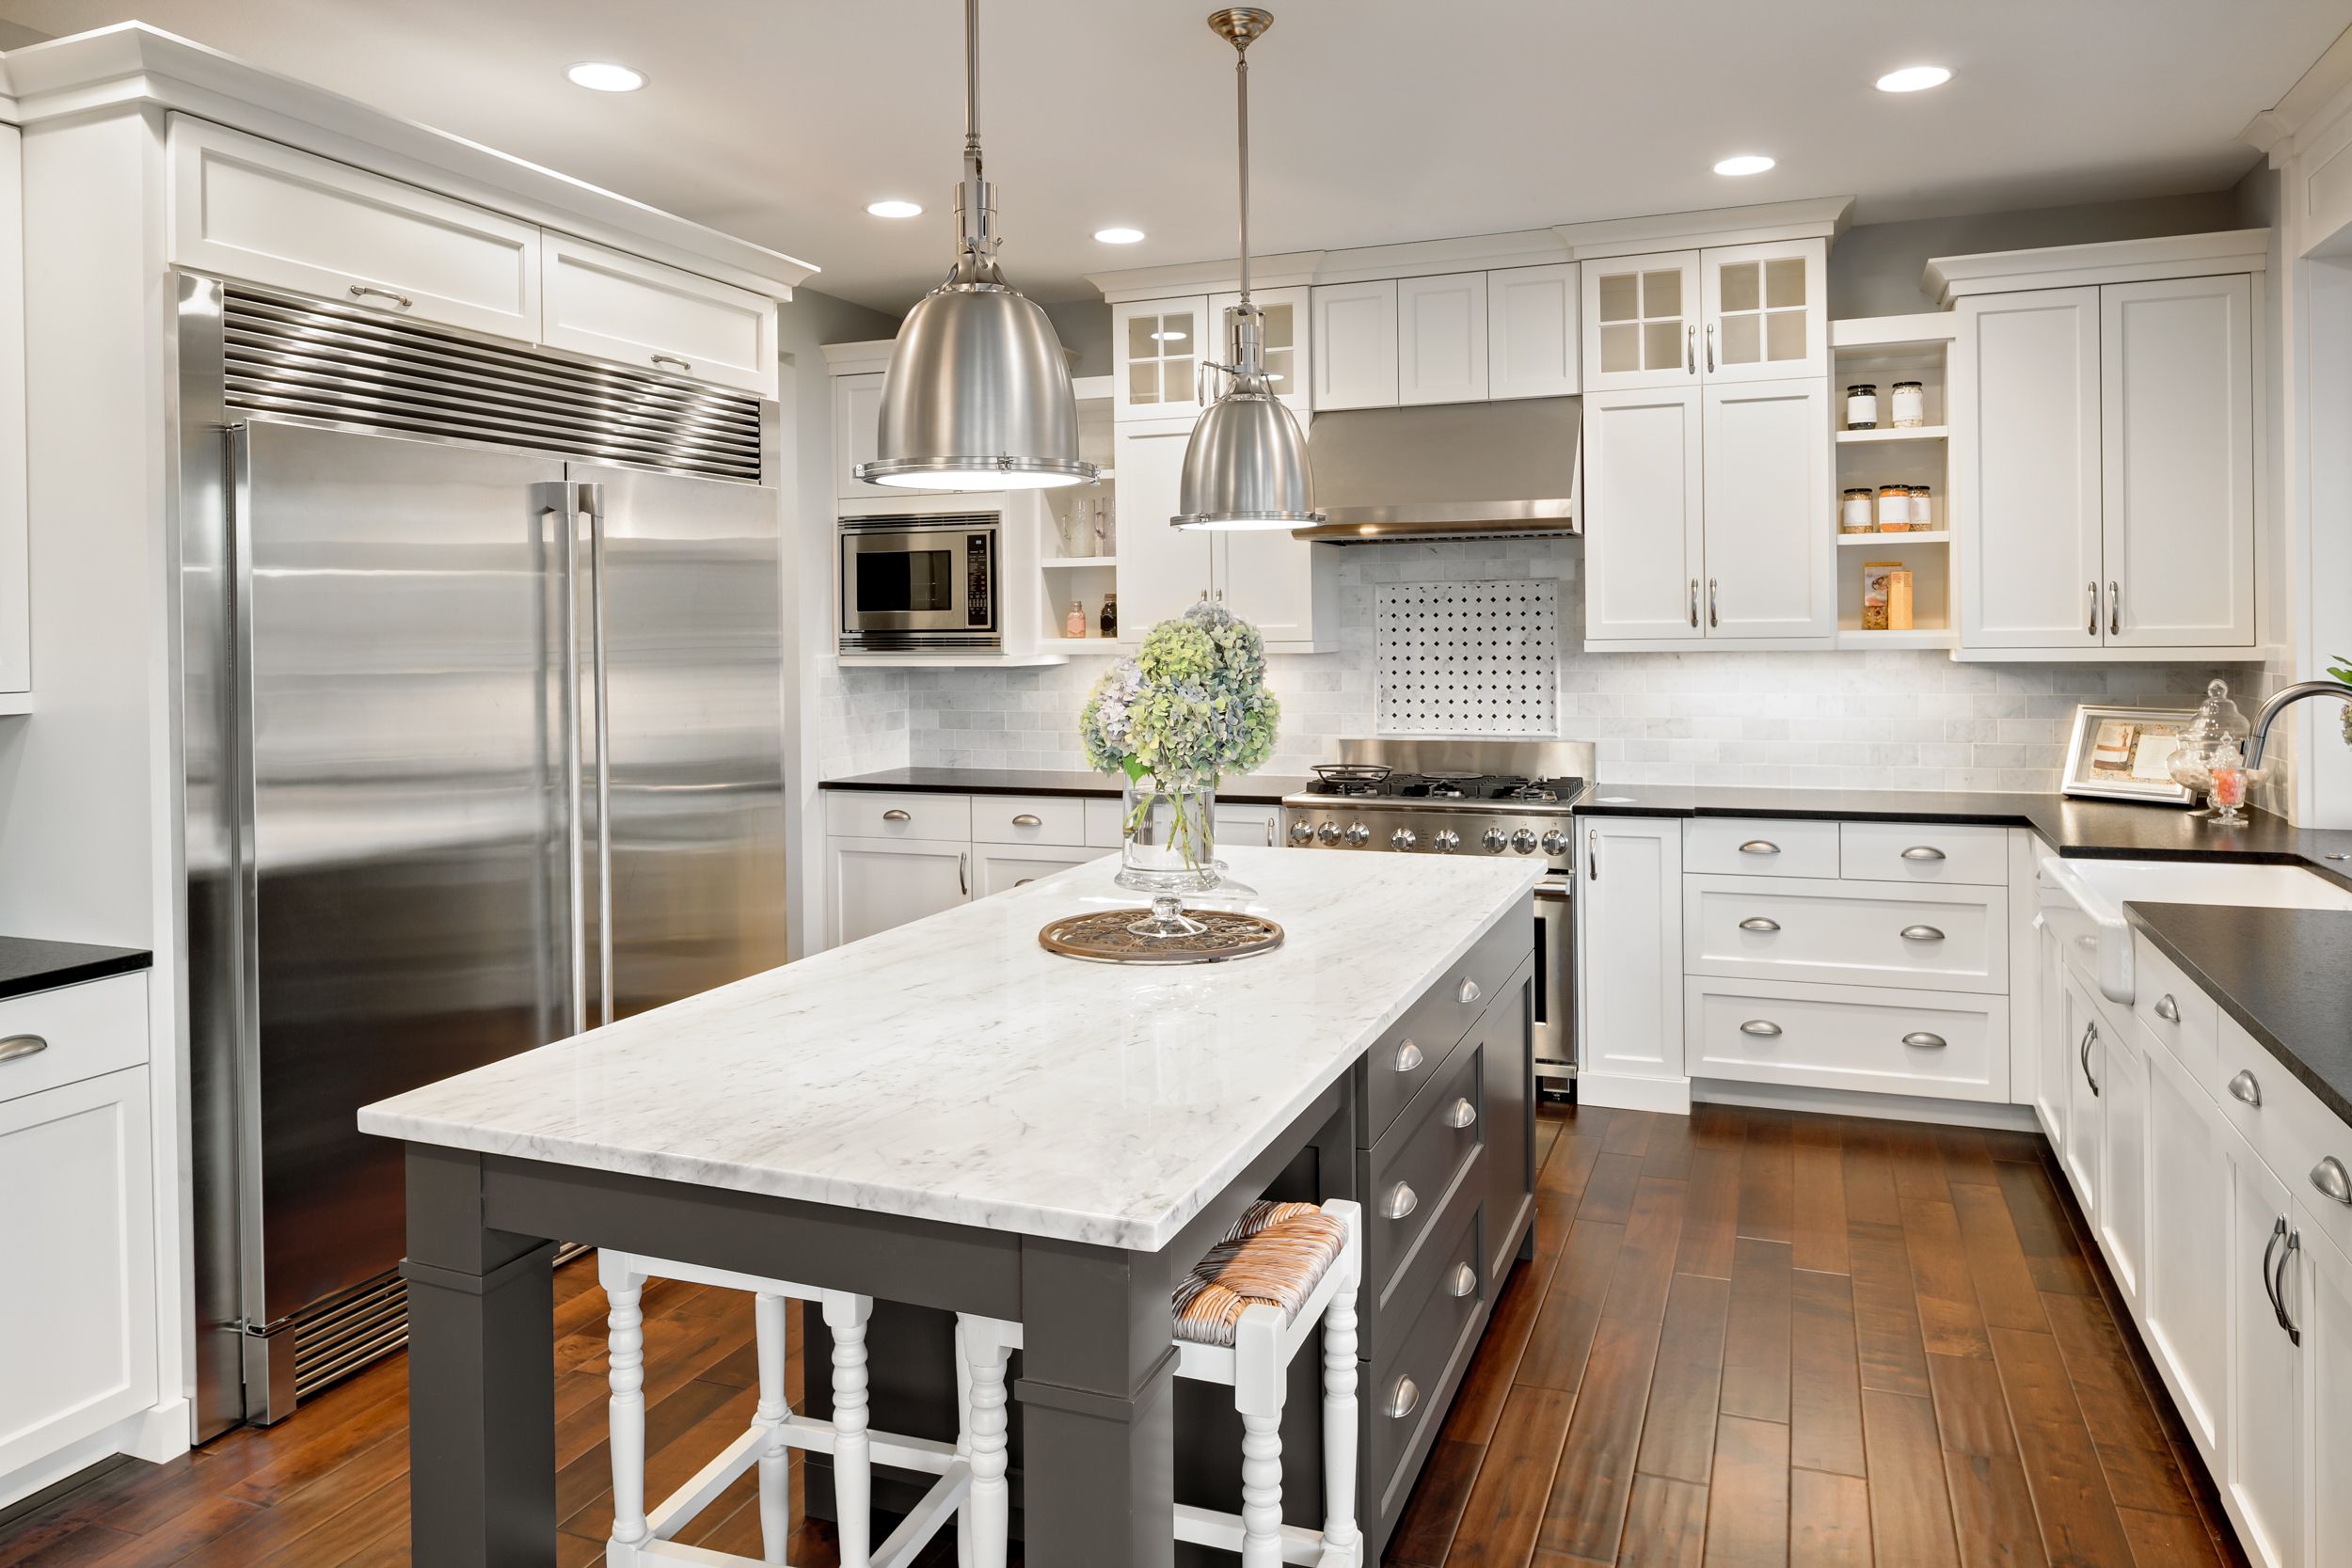 Why is kitchen remodeling essential? Reasons and advantages you must know!